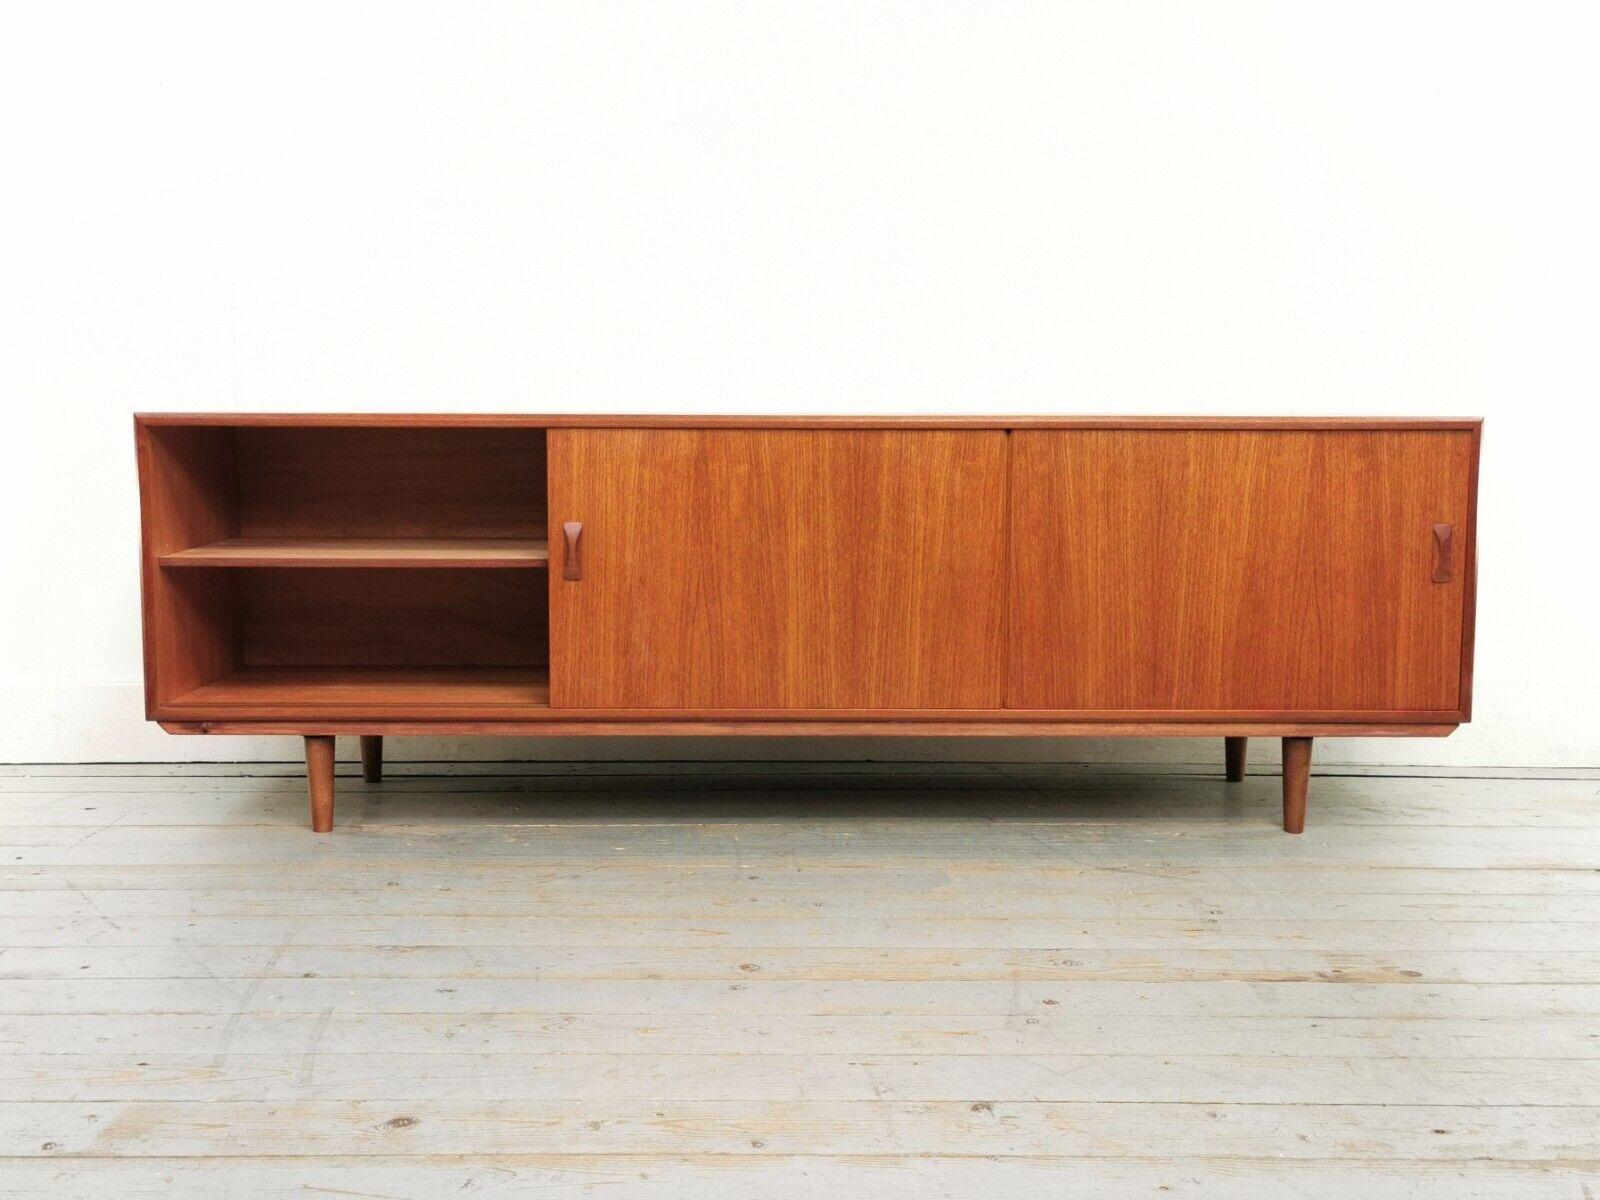 Clausen & Son teak sideboard raised on tapered legs. Two siding doors with four central drawers.

Top-quality, high-impact sitting at nearly 7 feet in width.

Overall this mid-century sideboard is in excellent vintage condition, we have pictured